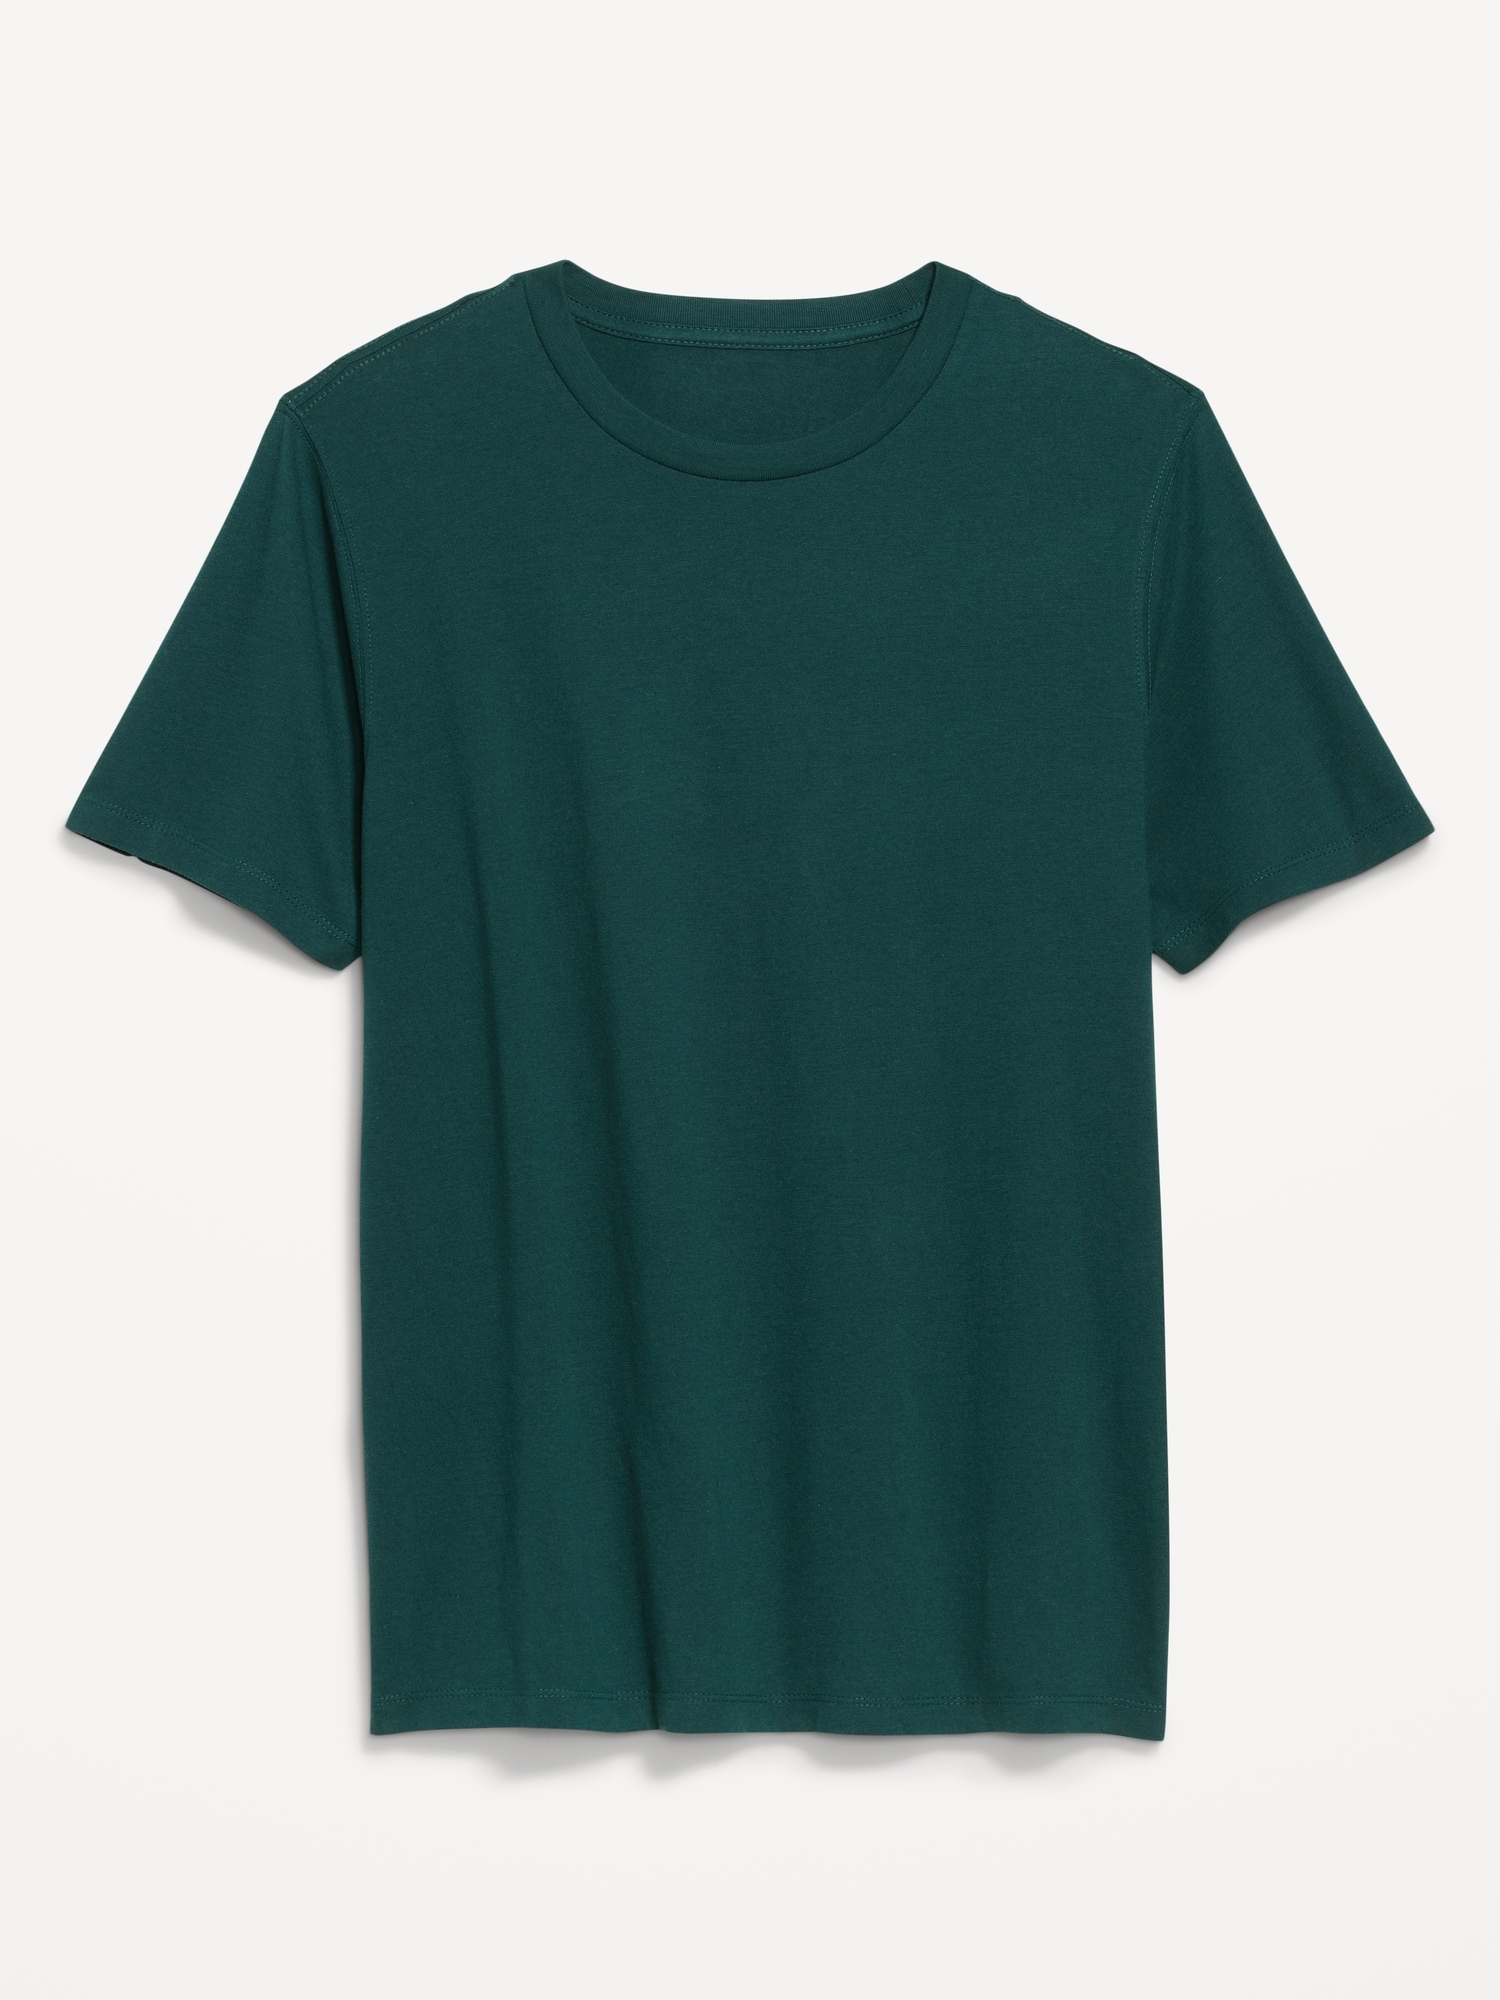 Go-Dry Cool Textured Performance T-Shirt